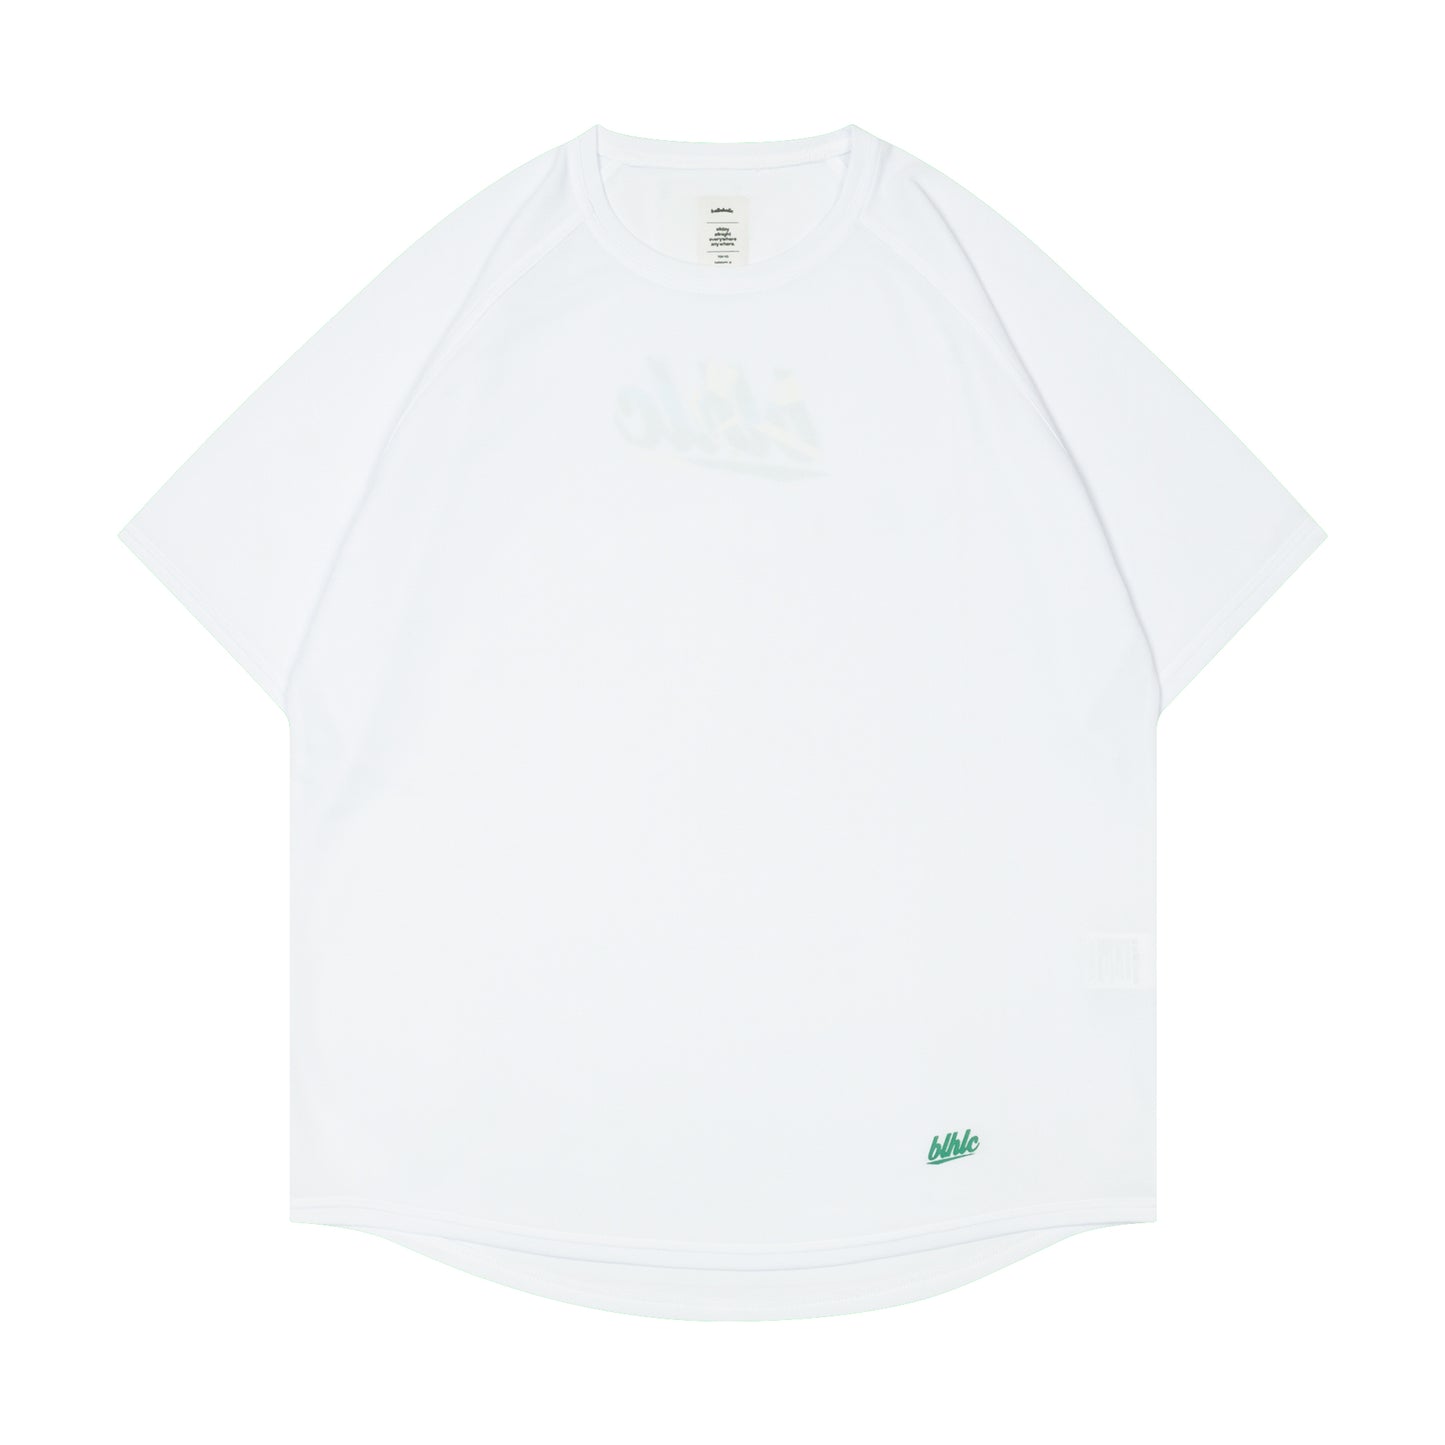 blhlc Back Print Cool Tee (white/west)